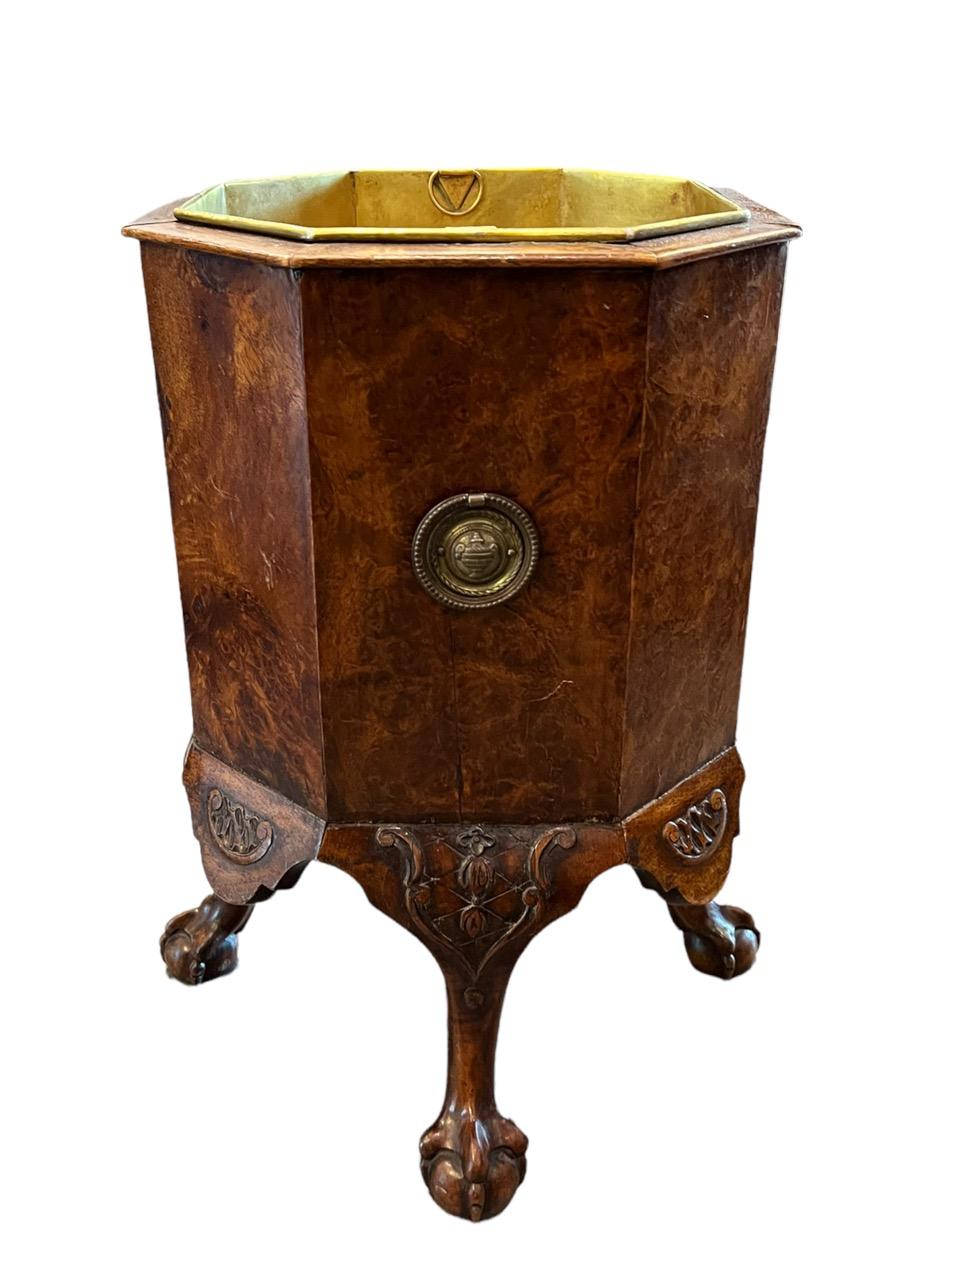 Late 19th century English walnut and burl wood Chippendale jardiniere ode to a bygone era. It is hand-carved from luxurious which features a stylized relief carving on the boldly scrolled legs that displays an obvious Baroque style